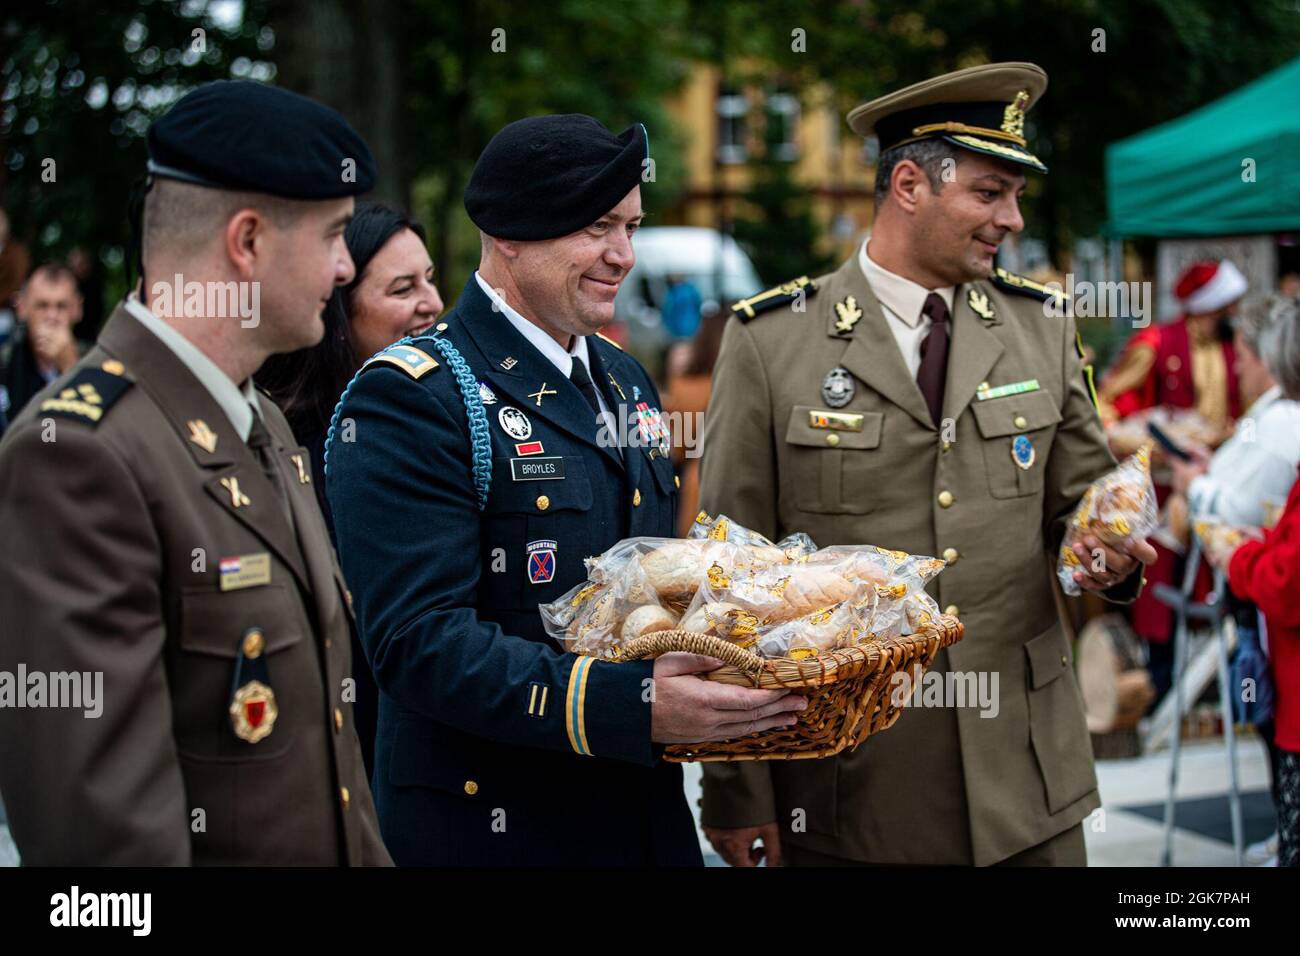 From left, Croatian Land Forces Capt. Dario Biljeskovic, commander of Storm Battery, U.S. Army Lt. Col. Craig Broyles, commander of Battle Group Poland, and Romanian Land Forces Maj. Mircea Zemtev, commander of Sky Guardians, hand out bread to Orzysz citizens during the Harvest Festival in Orzysz, Poland, August 29, 2021. Battle Group Poland's leaders joined the local community to celebrate the Days of Orzysz and the Harvest Festival, strengthening our partnership. Stock Photo